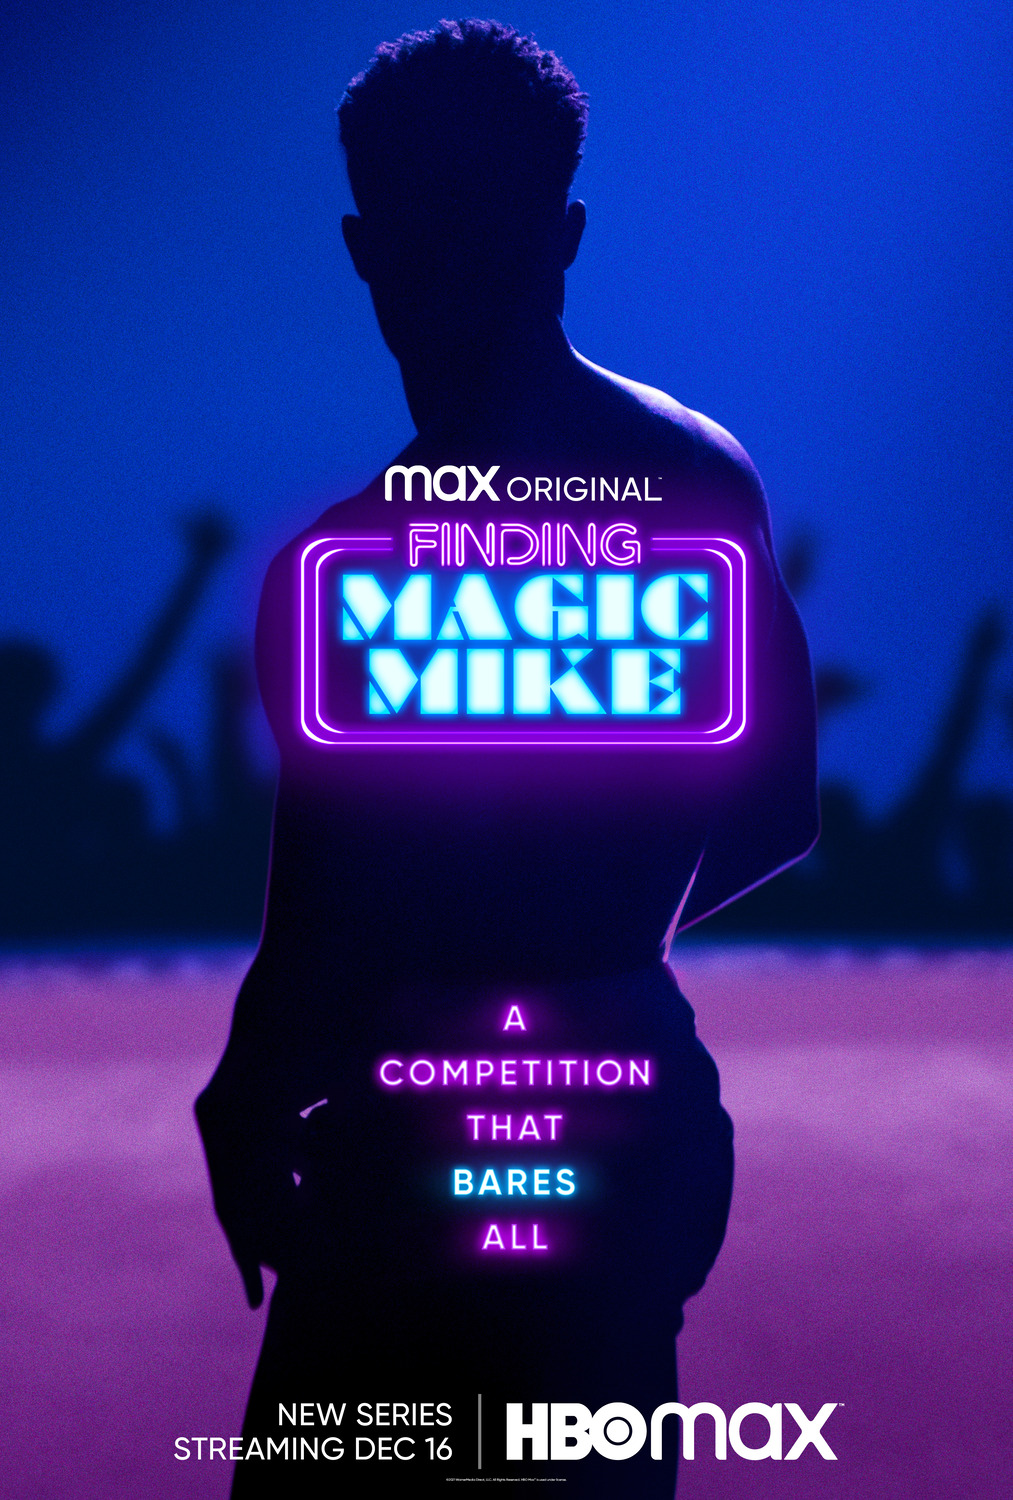 Extra Large Movie Poster Image for Finding Magic Mike 